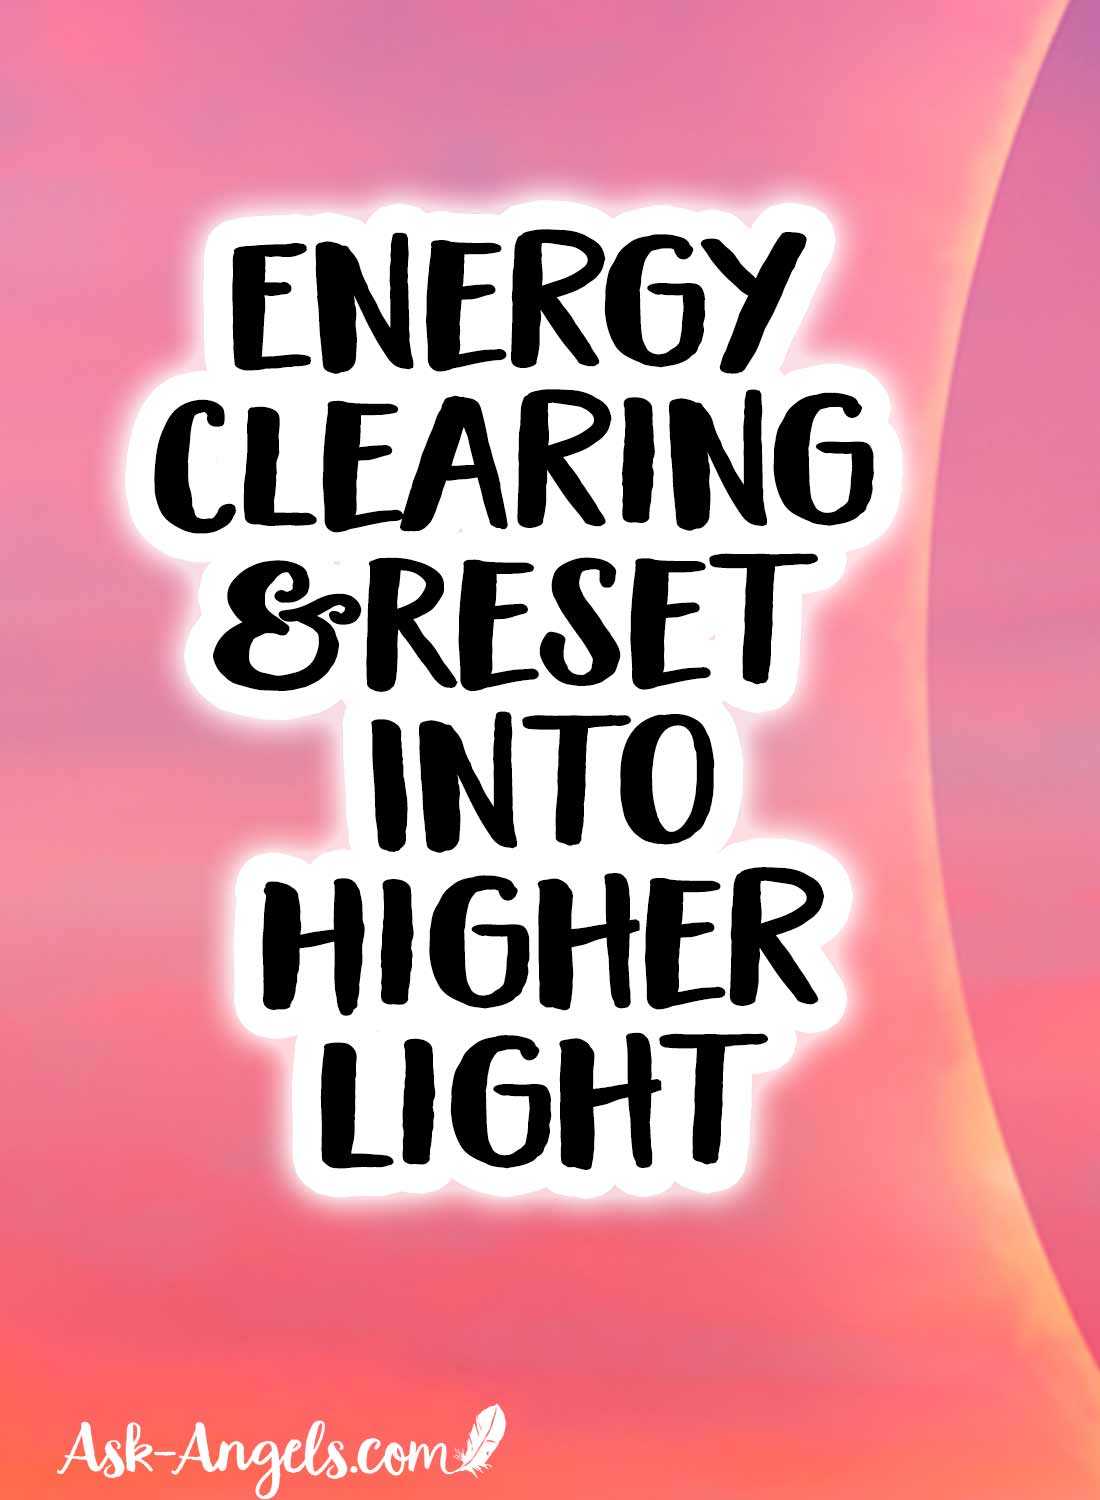 Energy Clearing & Reset Into Higher Light